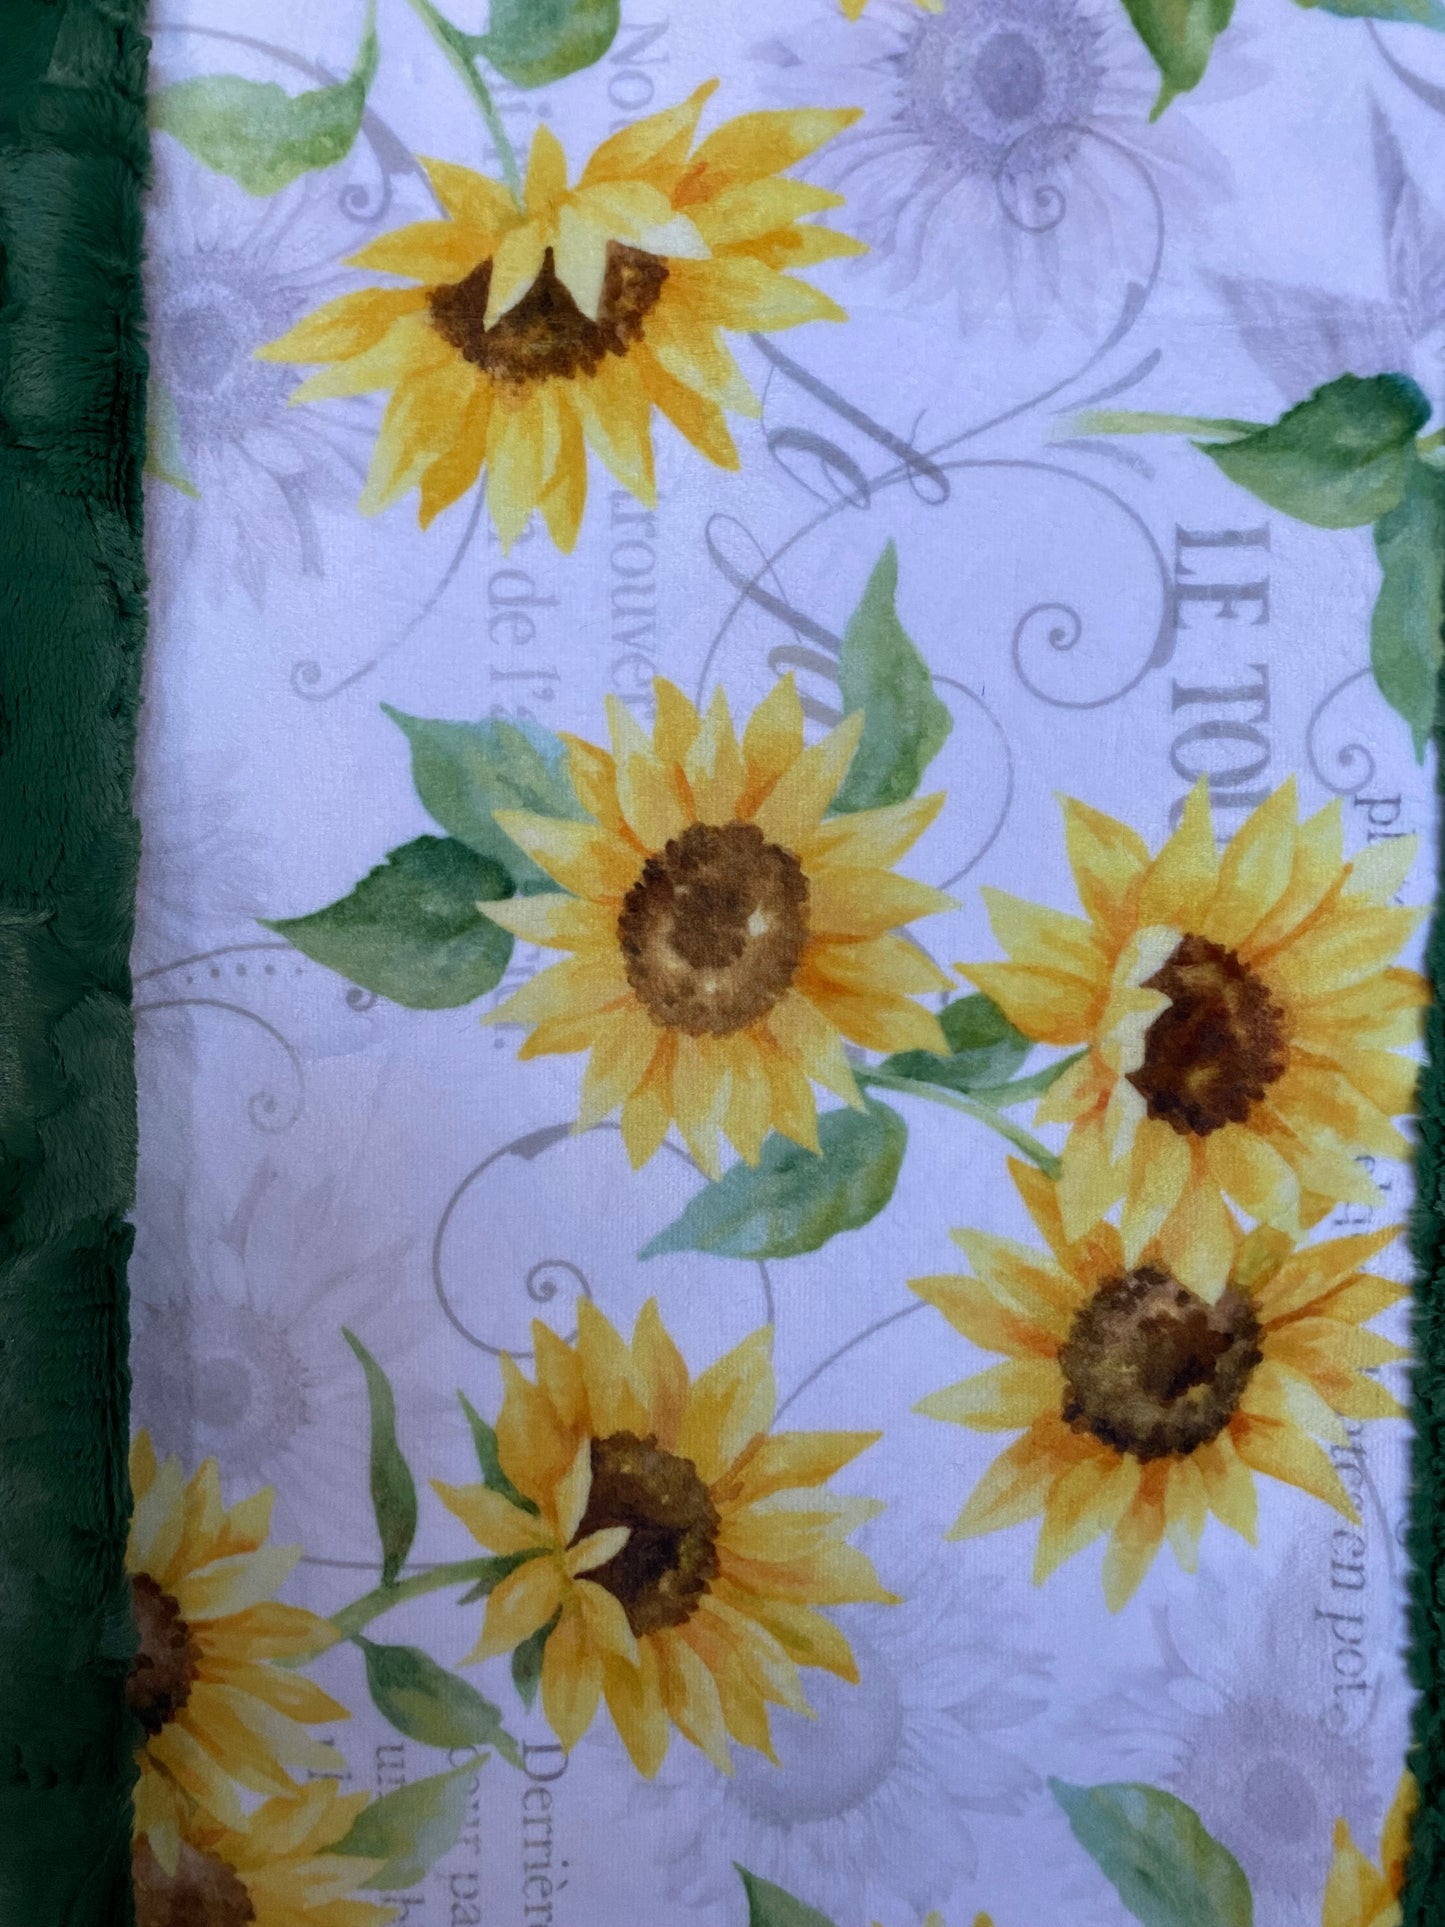 French Flowers Sunflowers on Evergreen Hide Throw Minky Blanket - Stylish and Cozy - 54x63